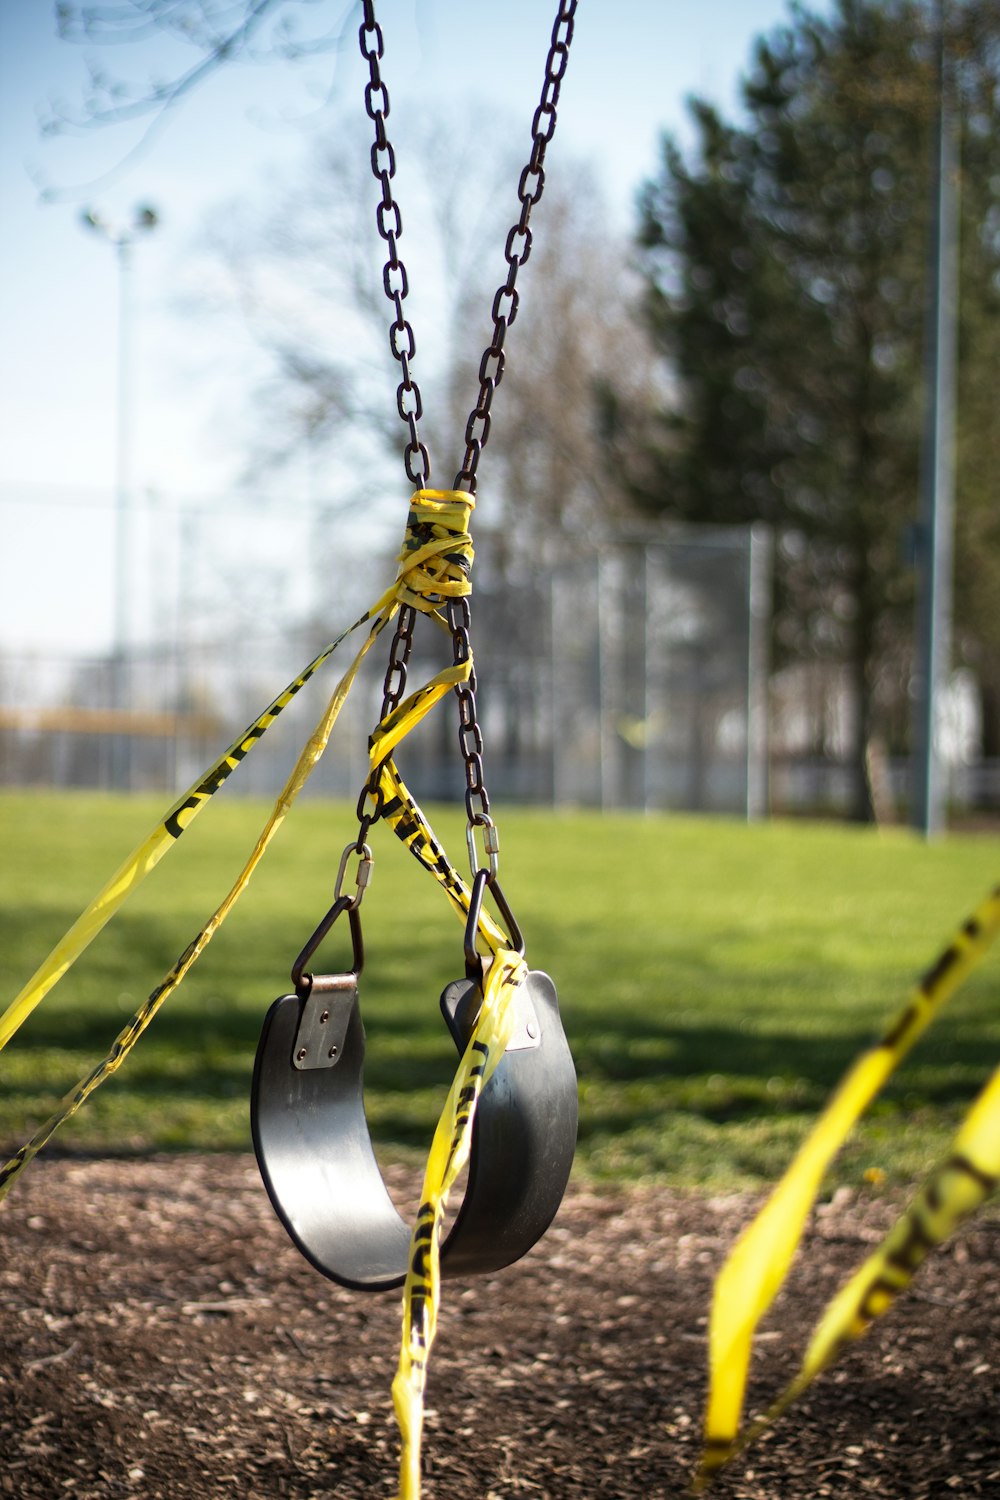 yellow and black swing near trees during daytime